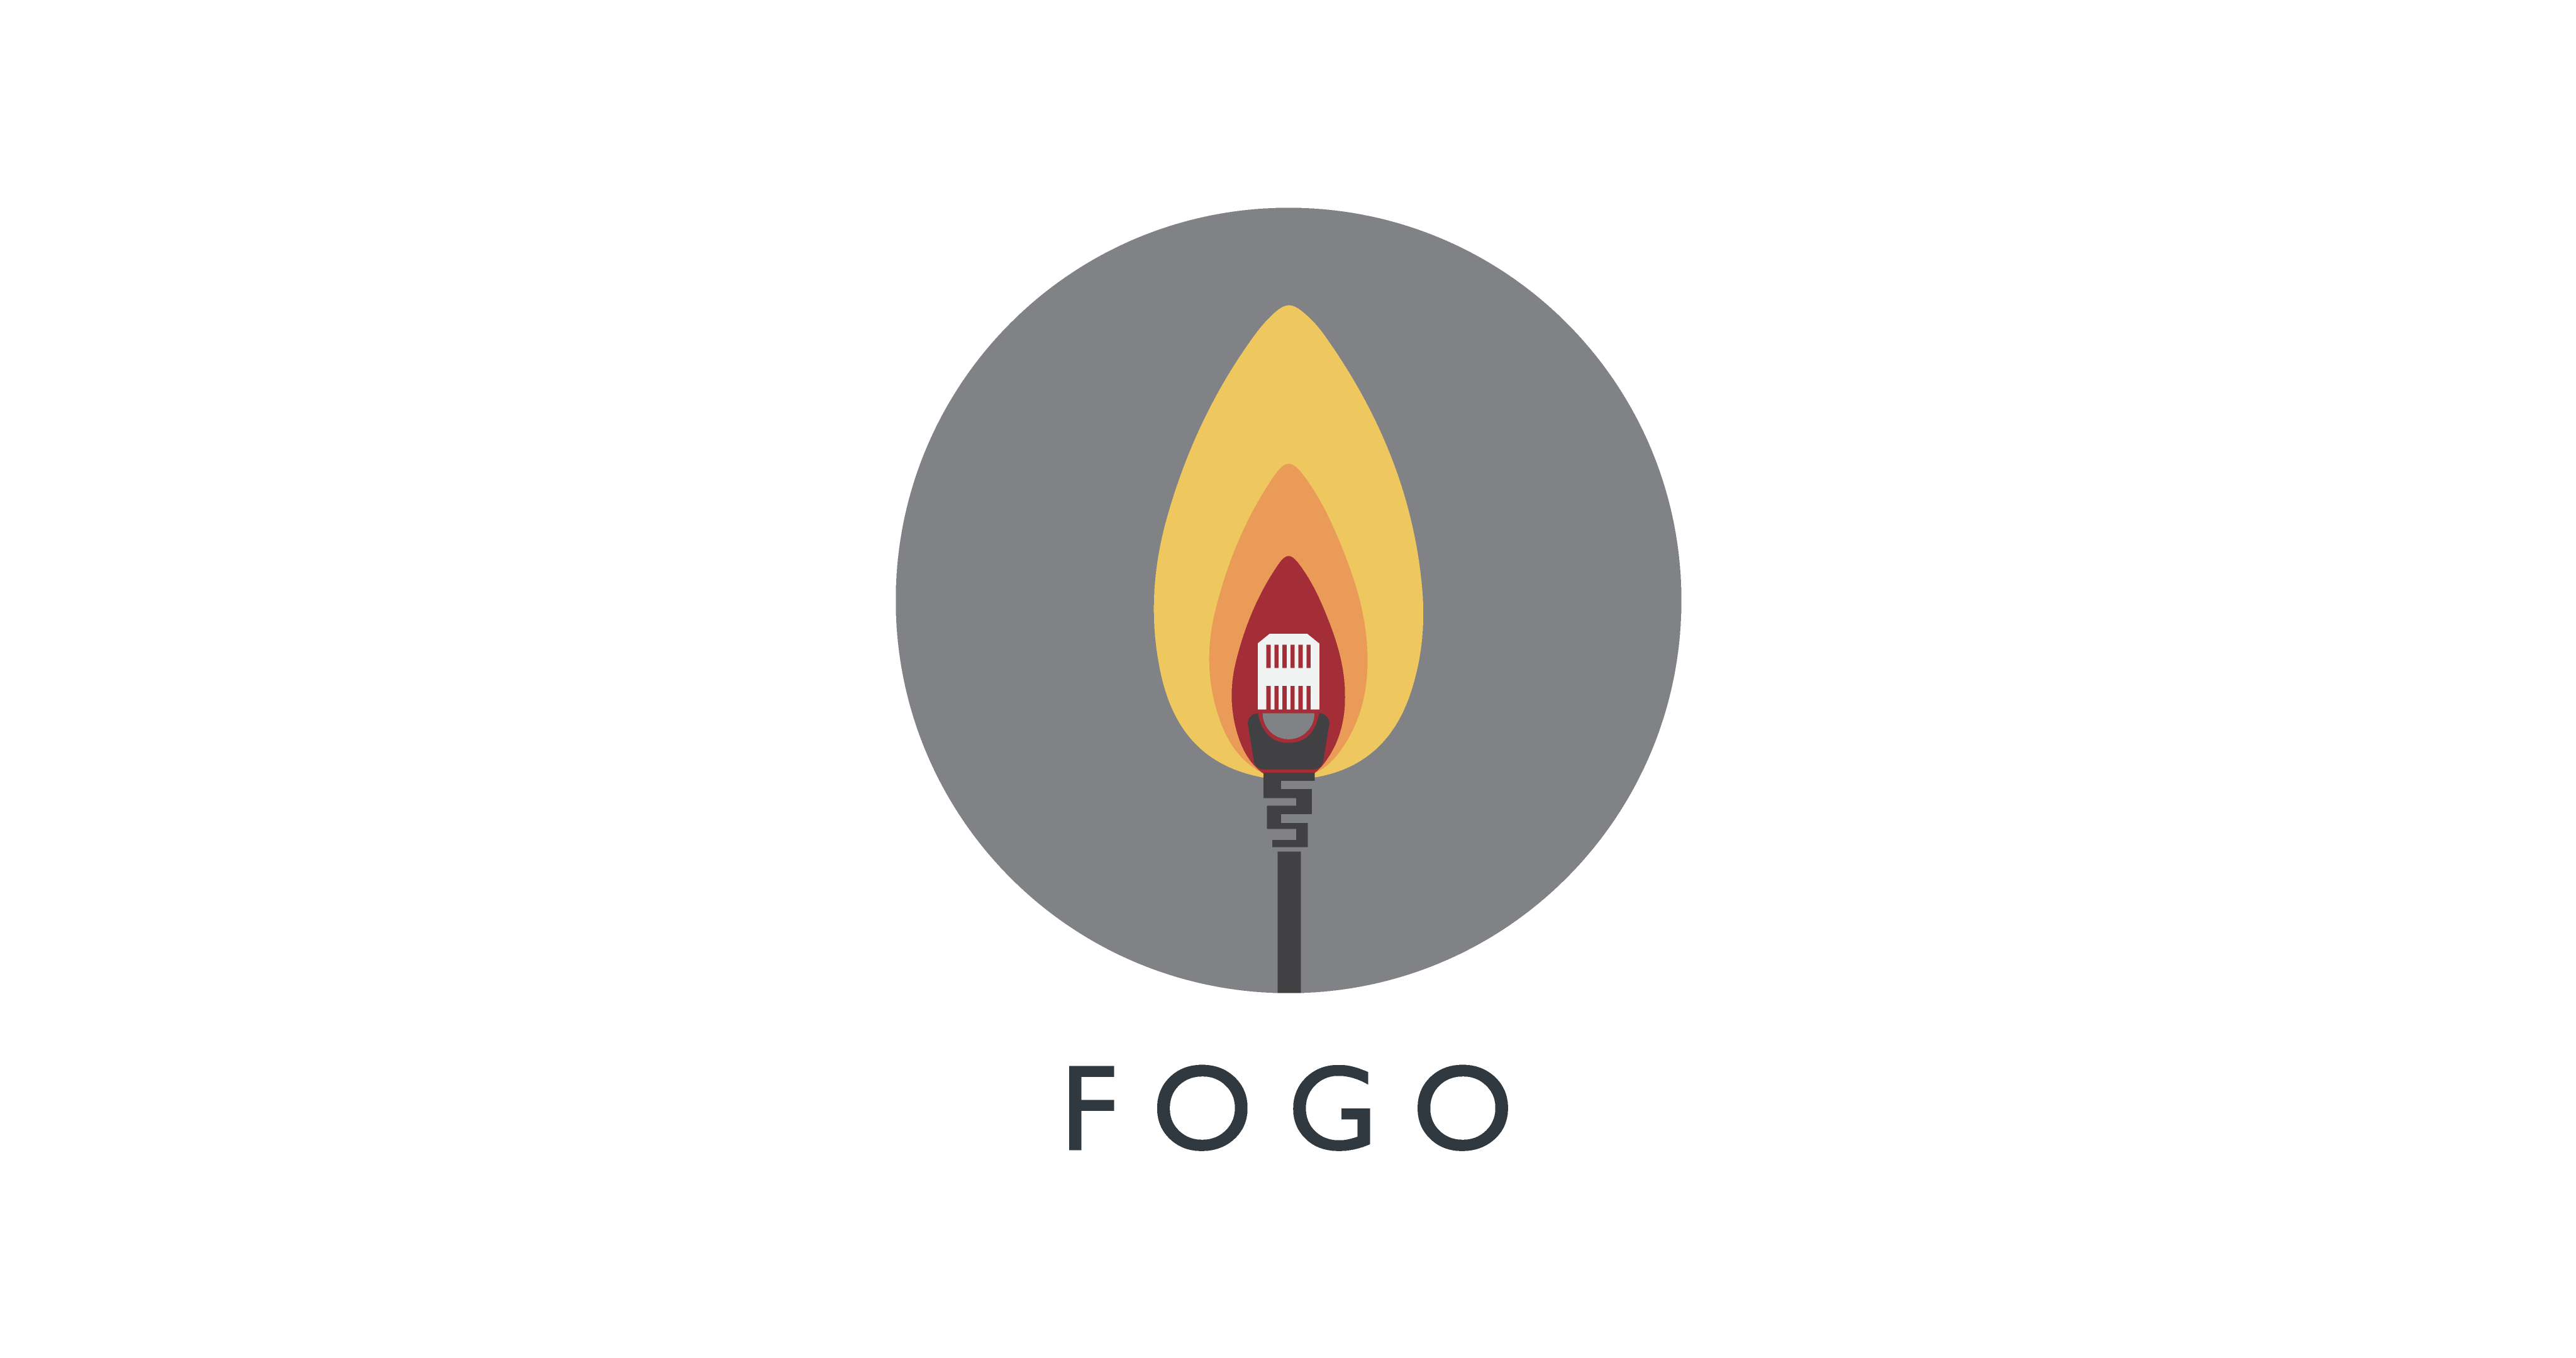 Fogo Player, a distributed ultra high definition video player